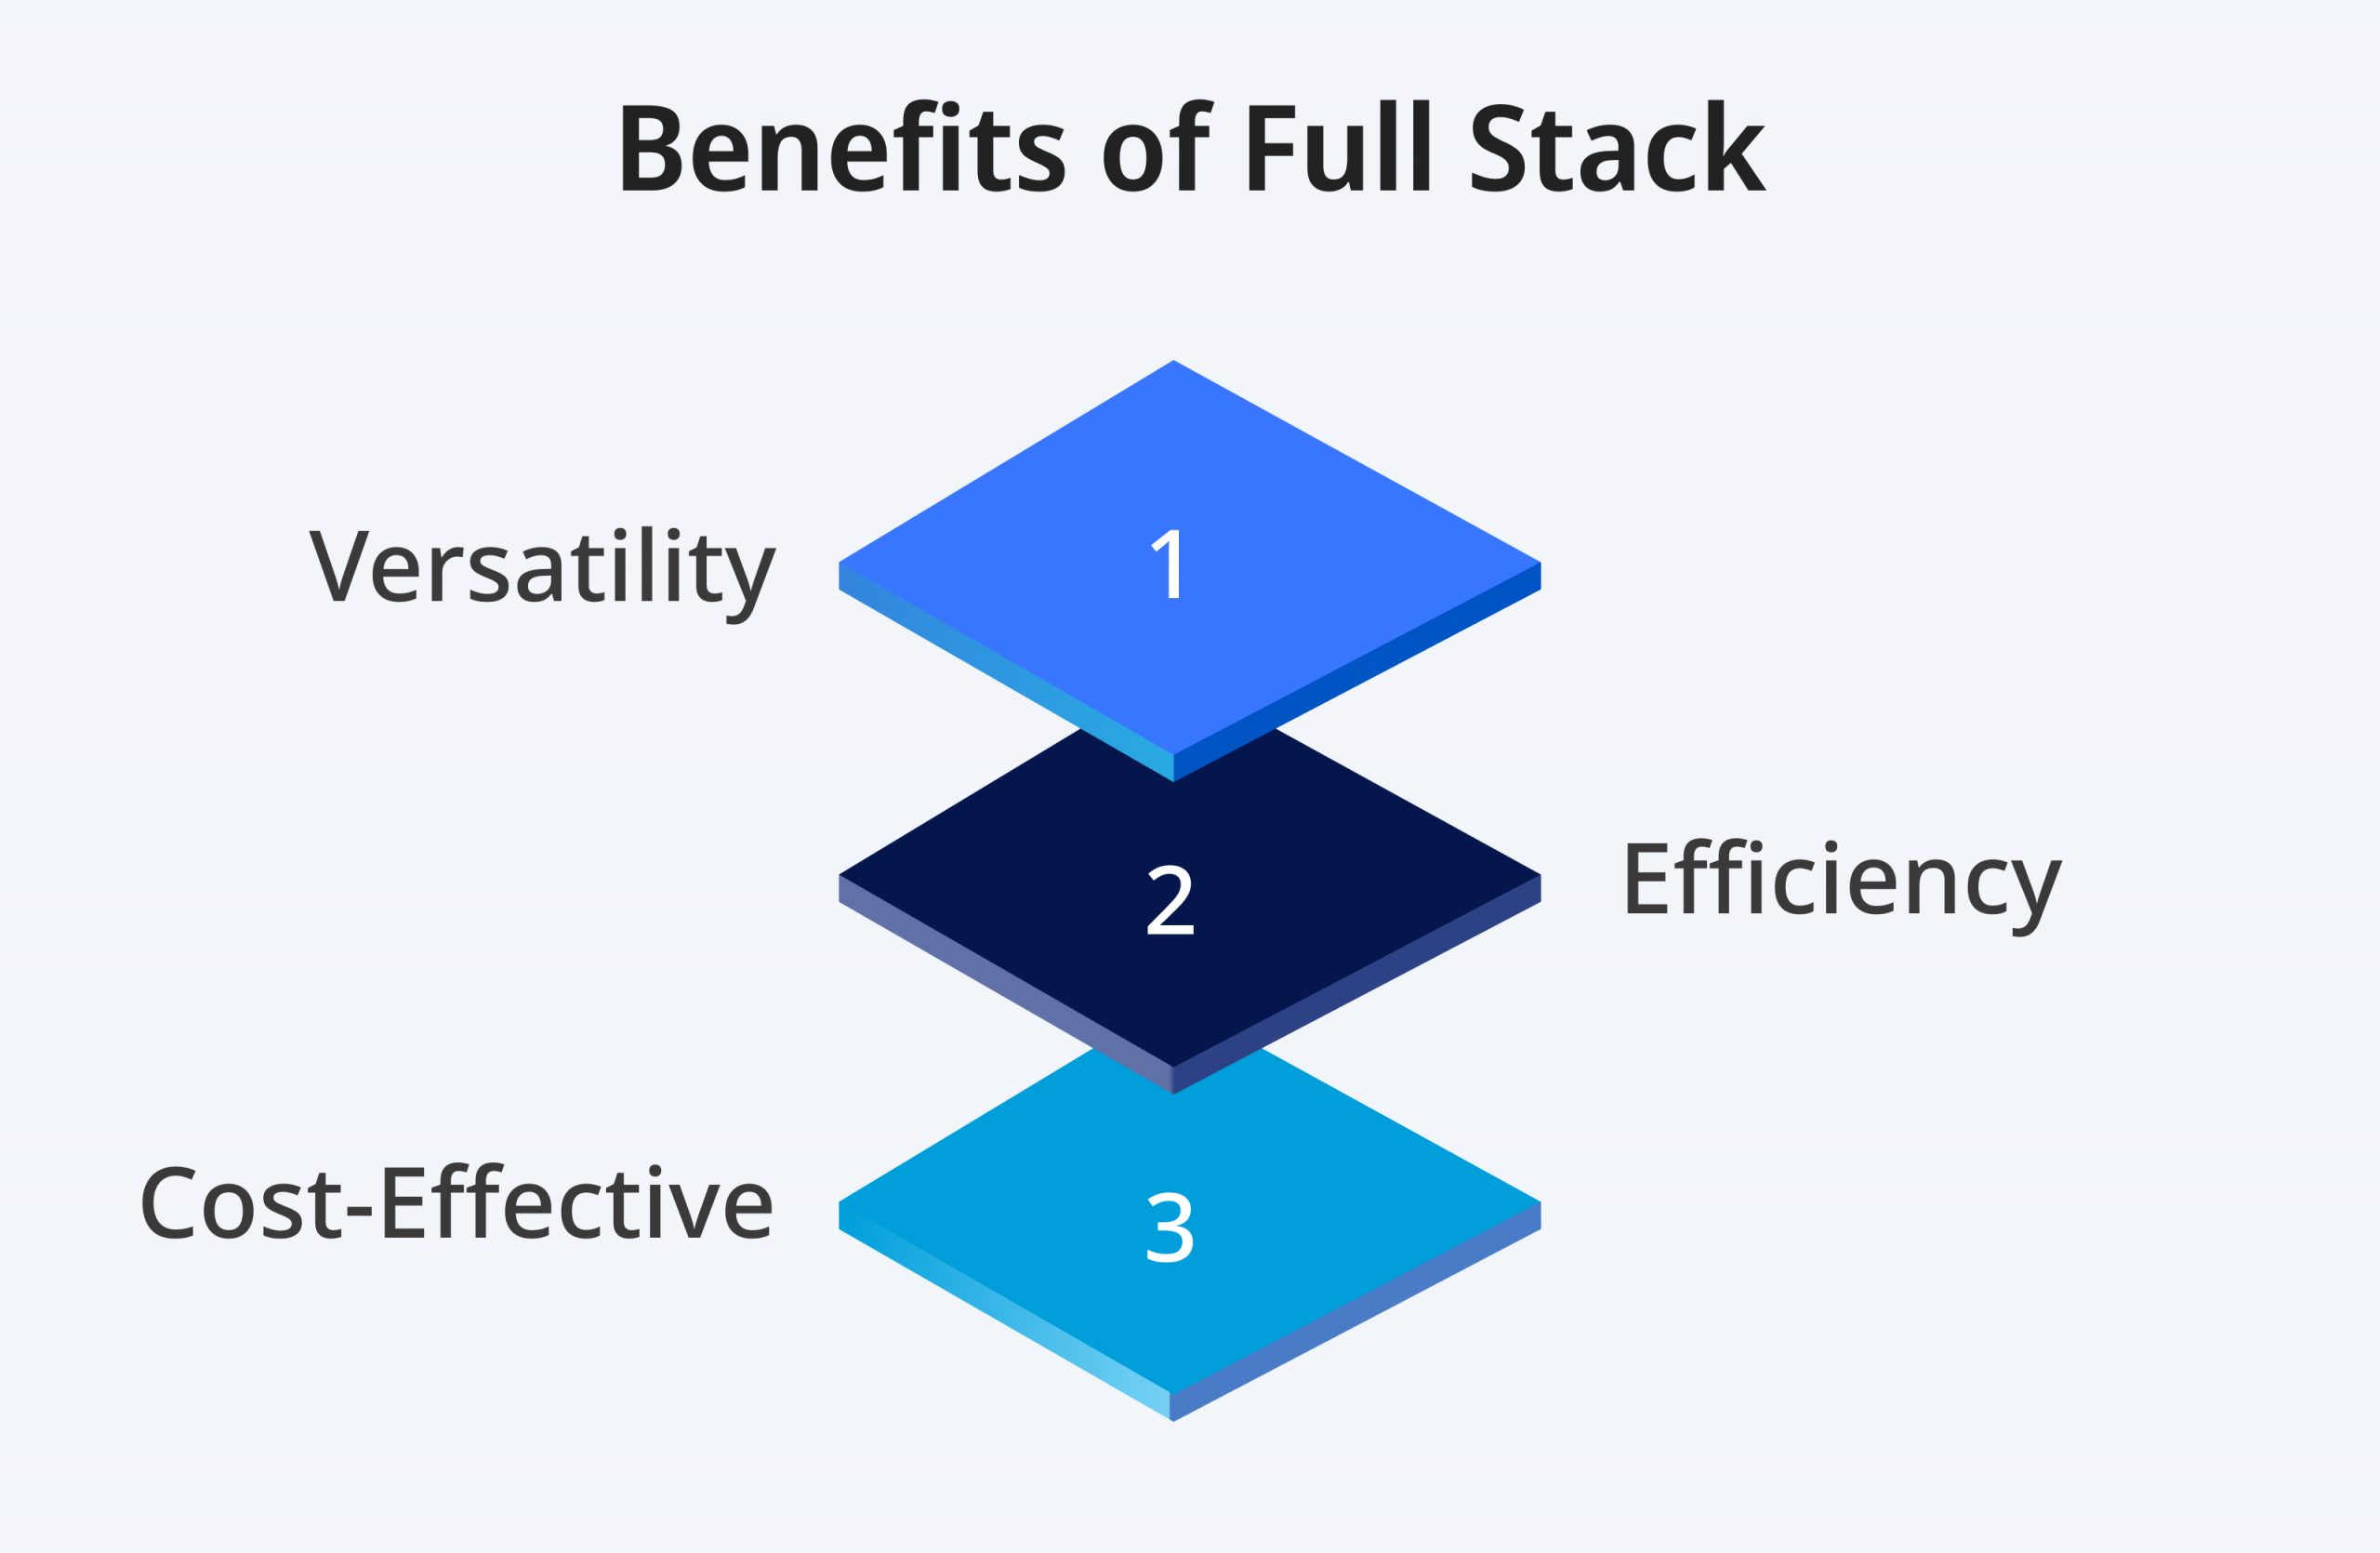 Benefits of Full Stack